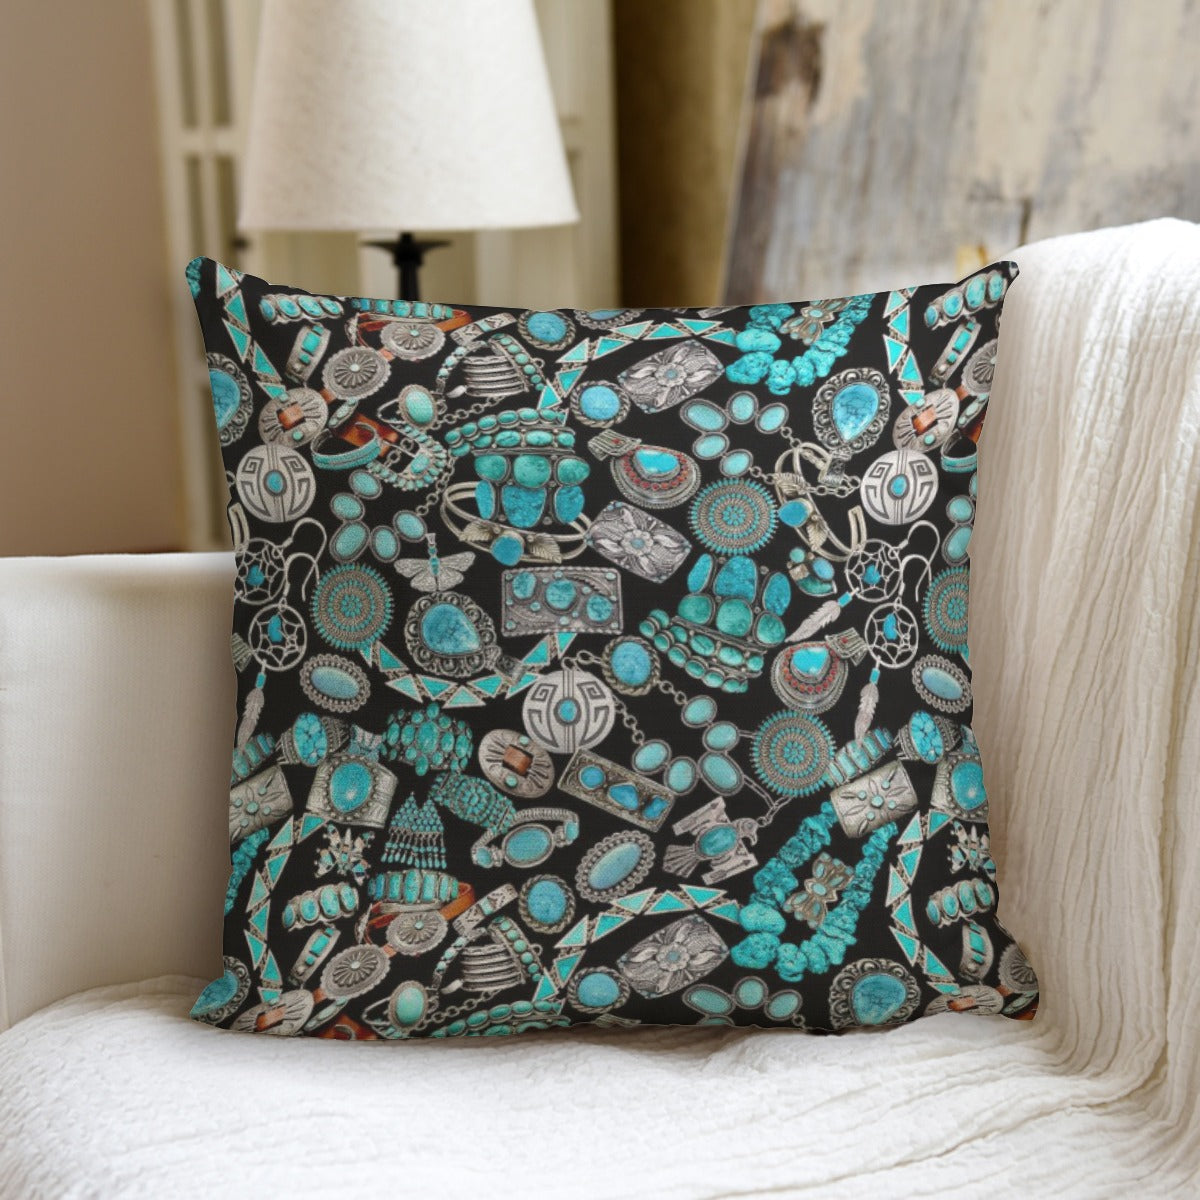 Turquoise Lovers couch pillow with pillow Inserts